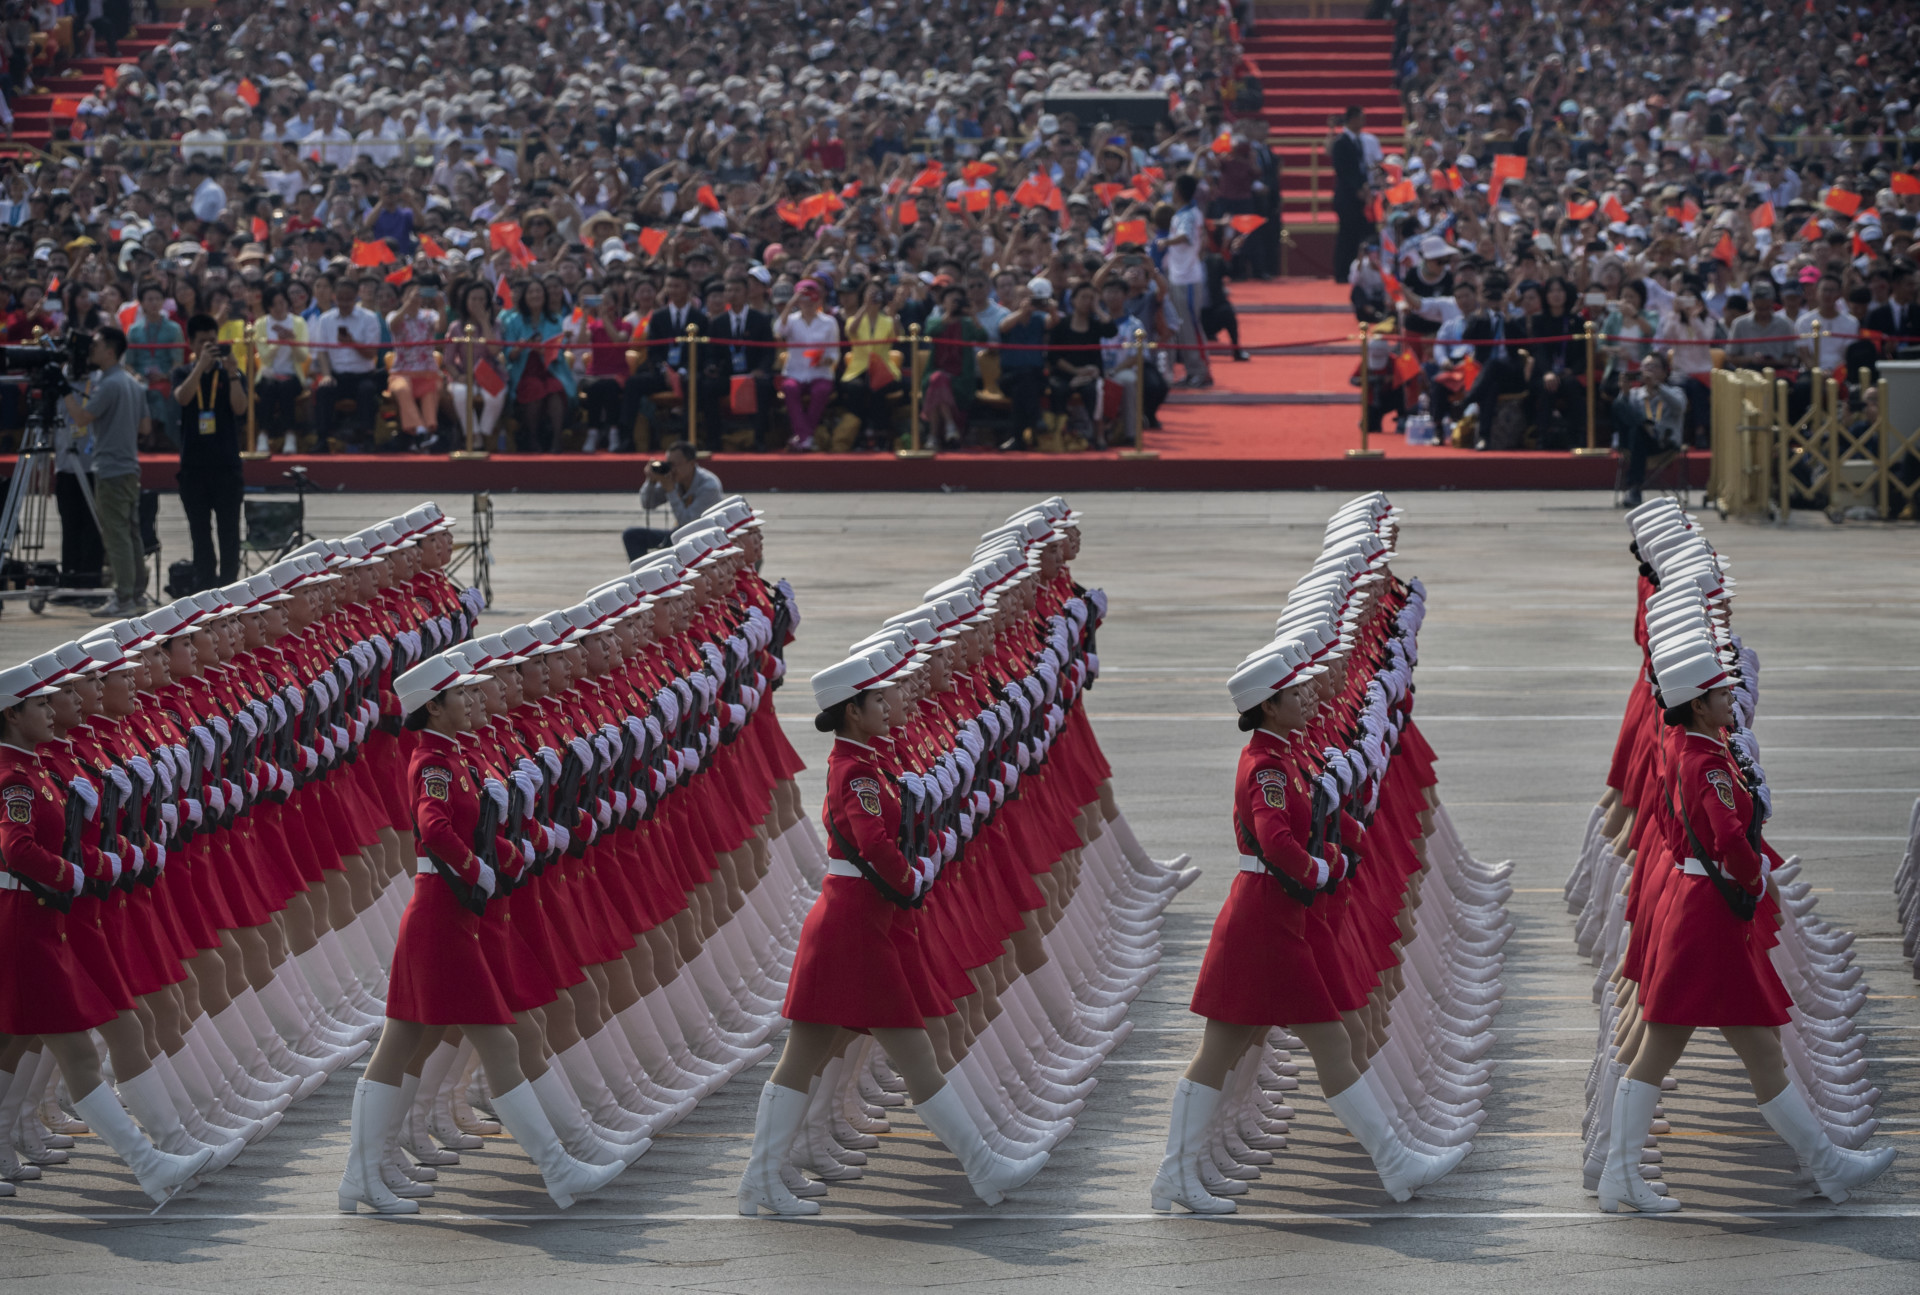 70th Anniversary Of The Founding Of The People's Republic Of China - Military Parade & Mass Pageantry|20220303-China-Gender_Gender-Parity-Rank|20220303-China-Gender-world-map|20220303-China-Gender_Xinjiang-Pop|20220303-China-Gender_Race-Ethnicity